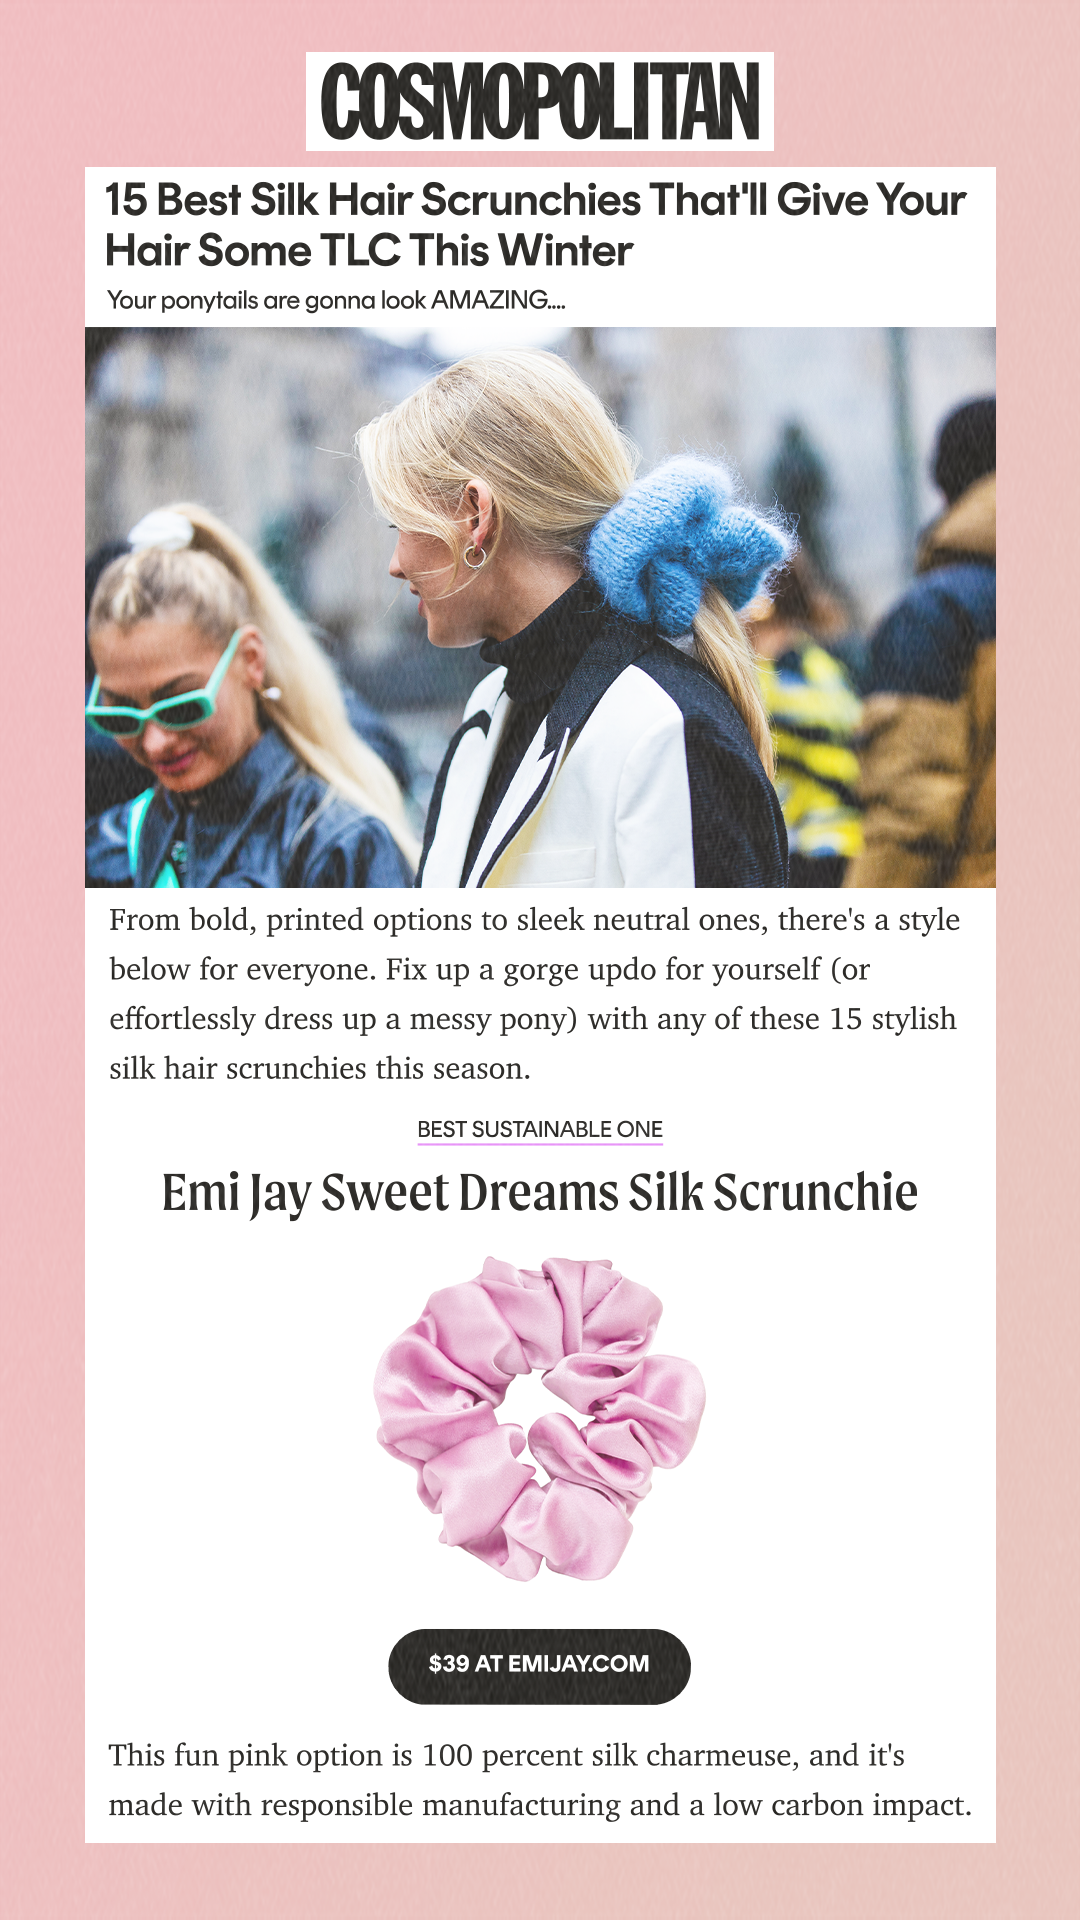 15 Best Silk Hair Scrunchies That'll Give Your Hair Some TLC This Winter Your ponytails are gonna look AMAZING. From bold, printed options to sleek neutral ones, there's a style below for everyone. Fix up a gorge updo for yourself (or effortlessly dress up a messy pony) with any of these 15 stylish silk hair scrunchies this season. best sustainable one Emi Jay Sweet Dreams Silk Scrunchie $39 AT EMIJAY.COM This fun pink option is 100 percent silk charmeuse, and it's made with responsible manufacturing and a low carbon impact.